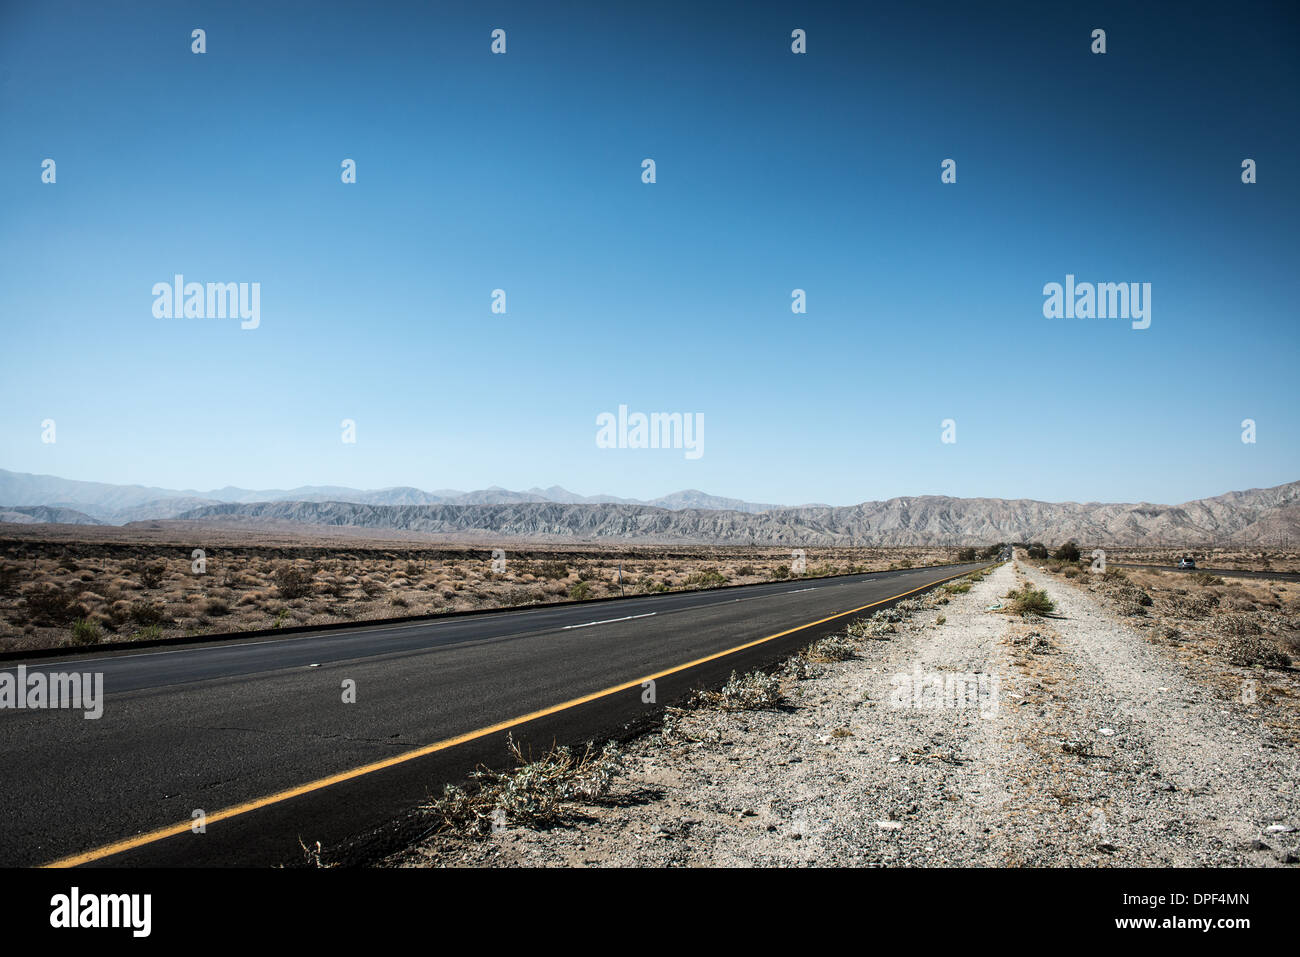 Twentynine Palms highway, White Water, California, USA Banque D'Images